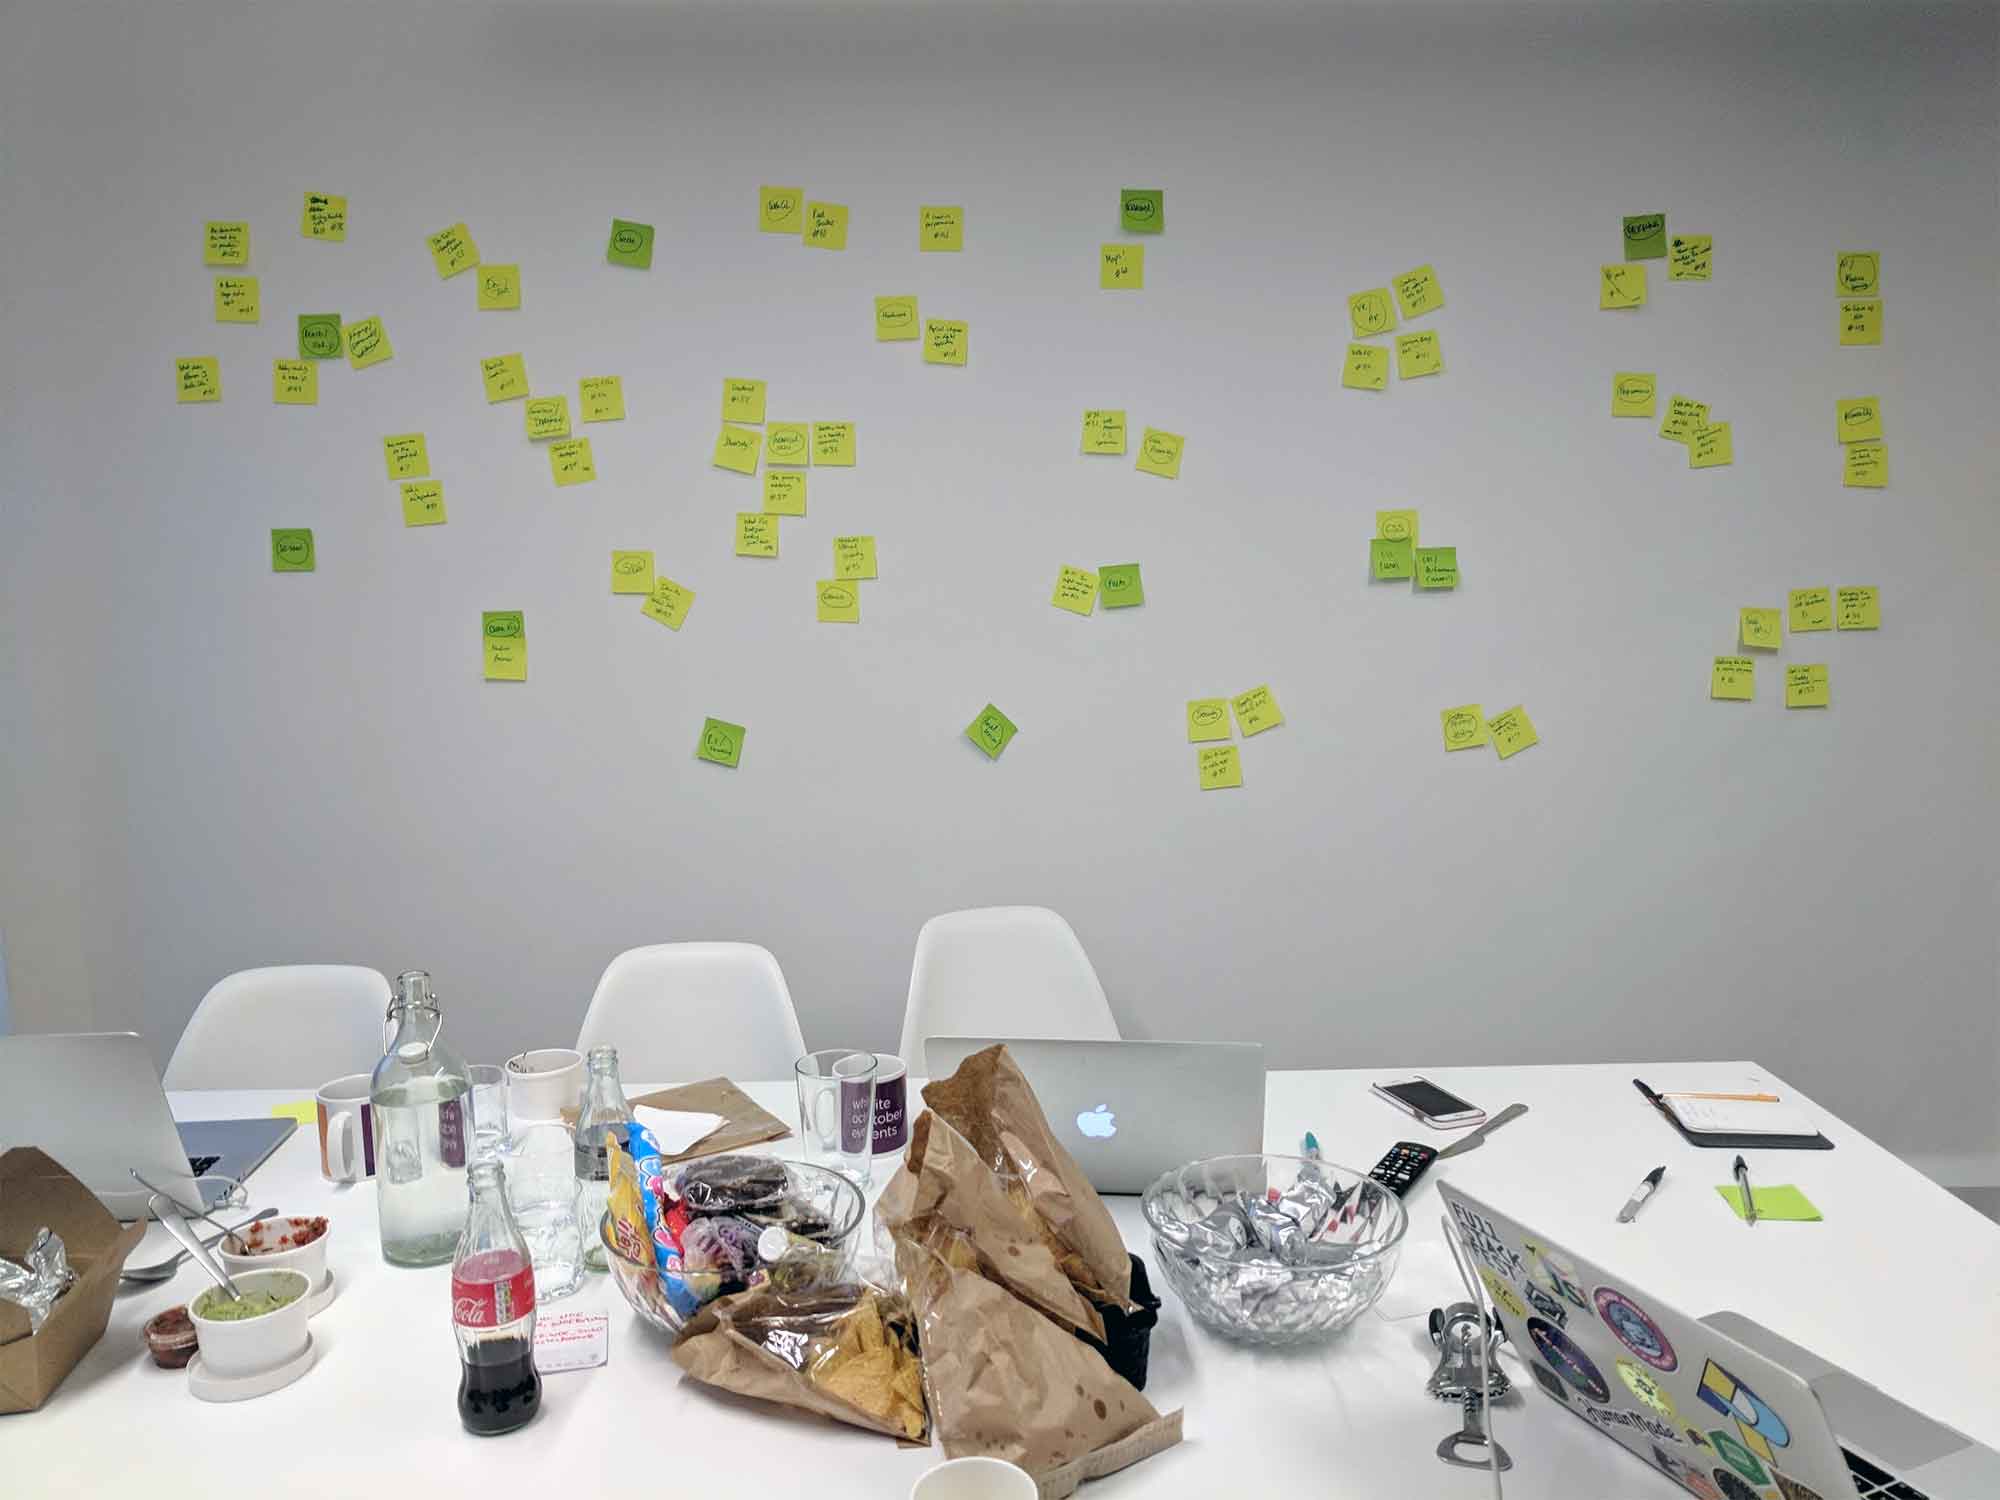 A wall of post-it notes in front of a table holding laptops and snacks